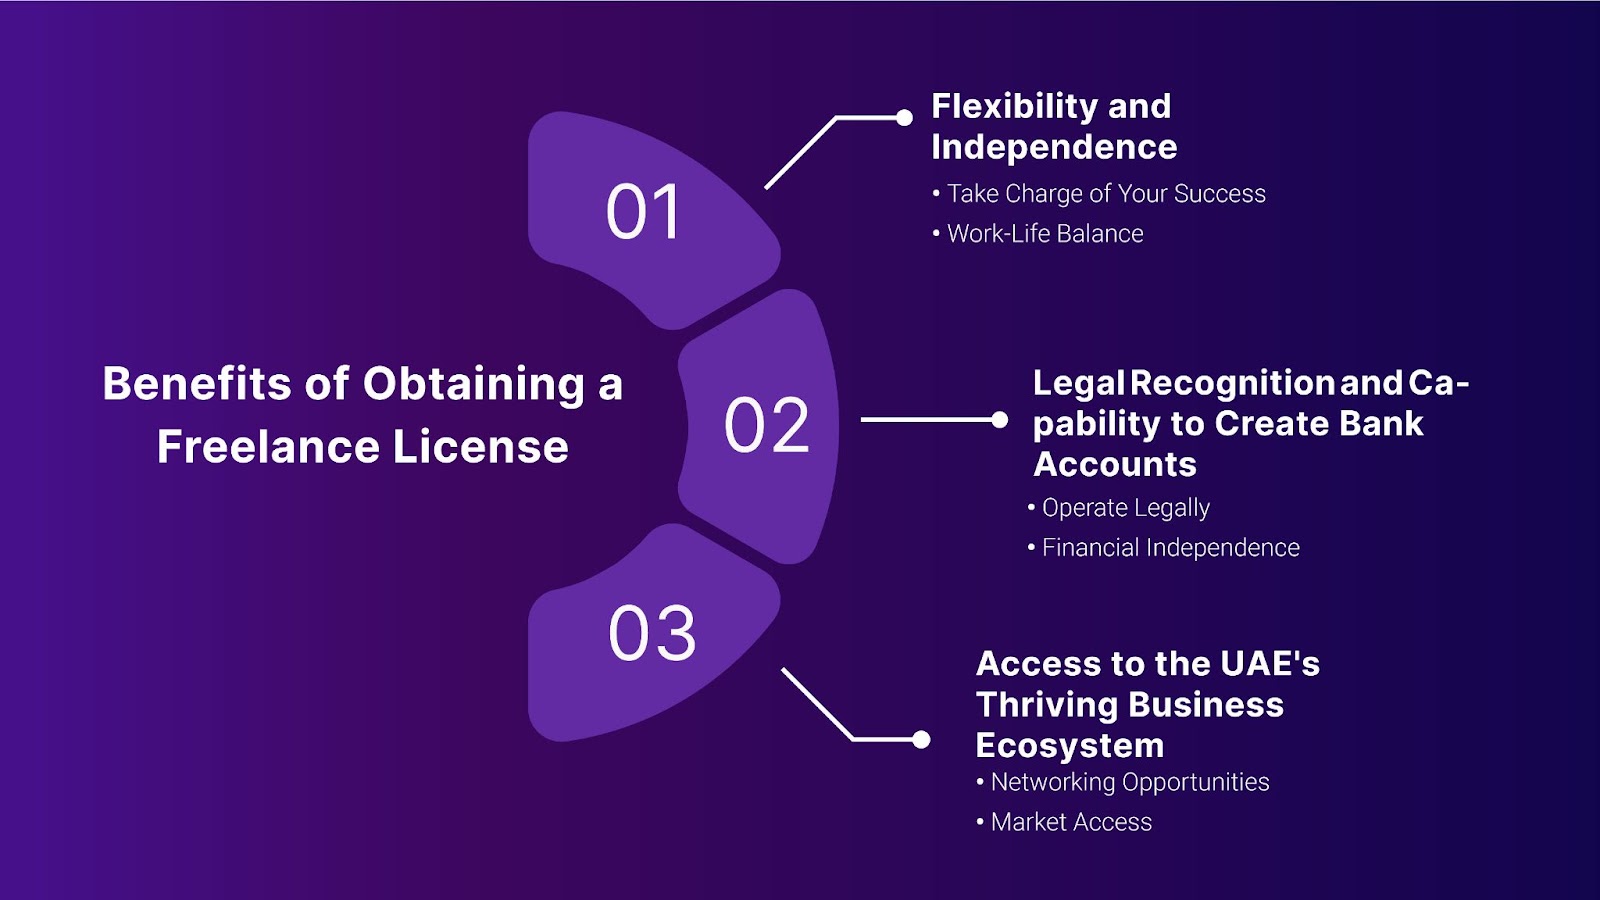 Benefits of Obtaining a Freelance License